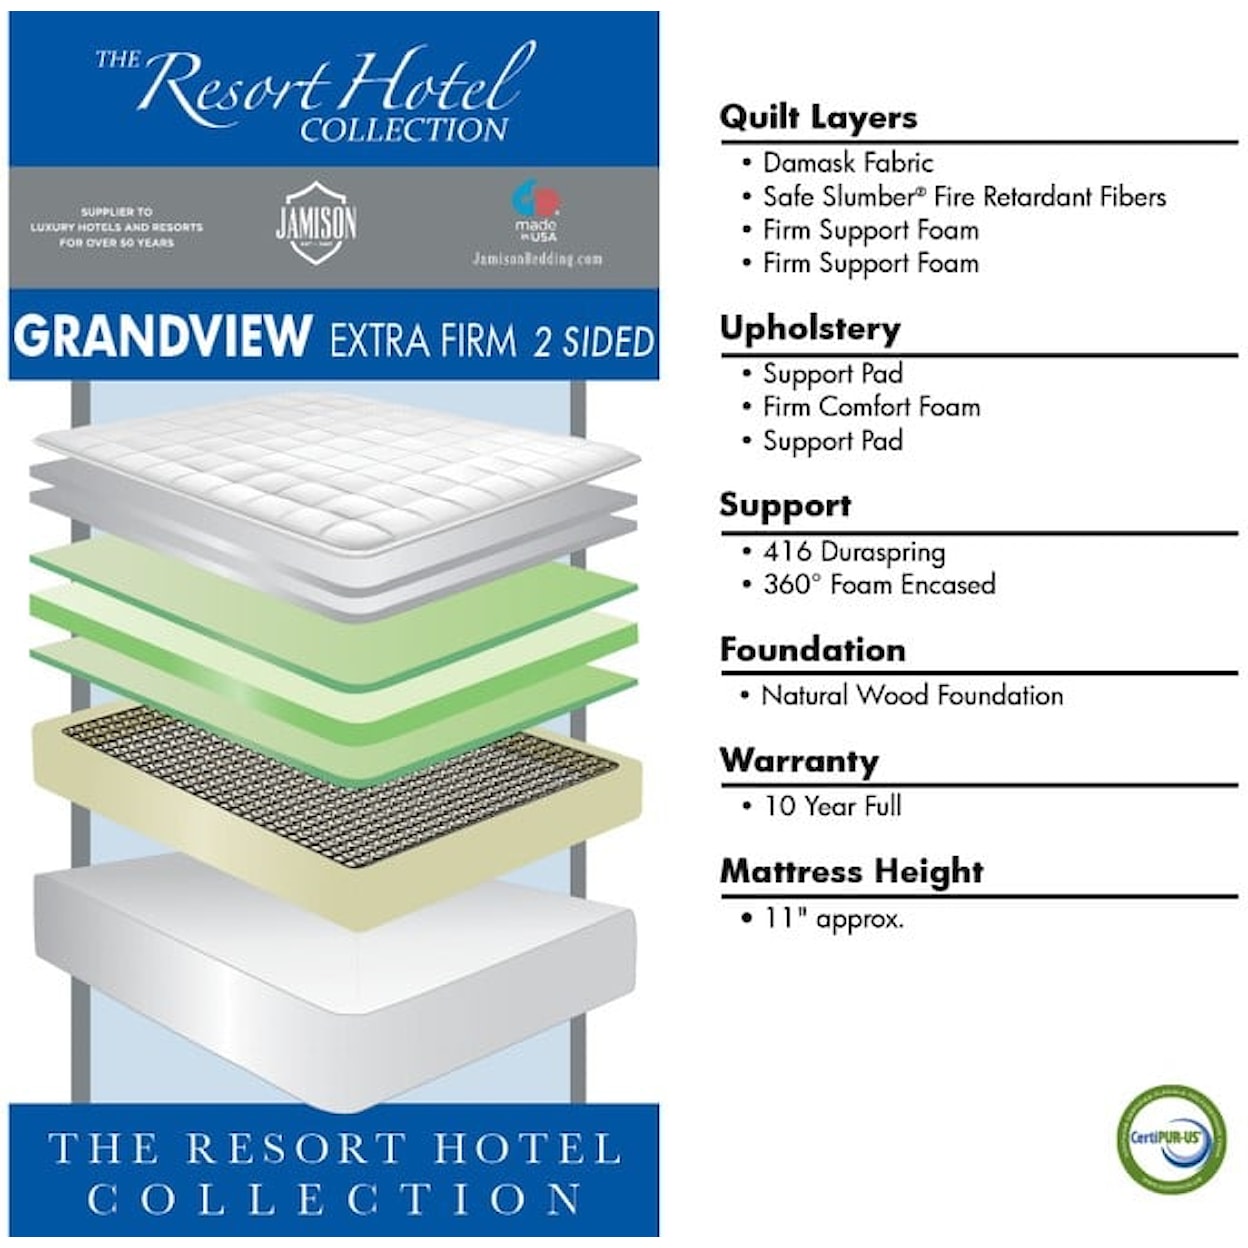 Jamison Bedding Resort Hotel Grandview Extra Firm GRANDVIEW 2/ SIDED EXTRA FIRM QUEEN | MATTRE